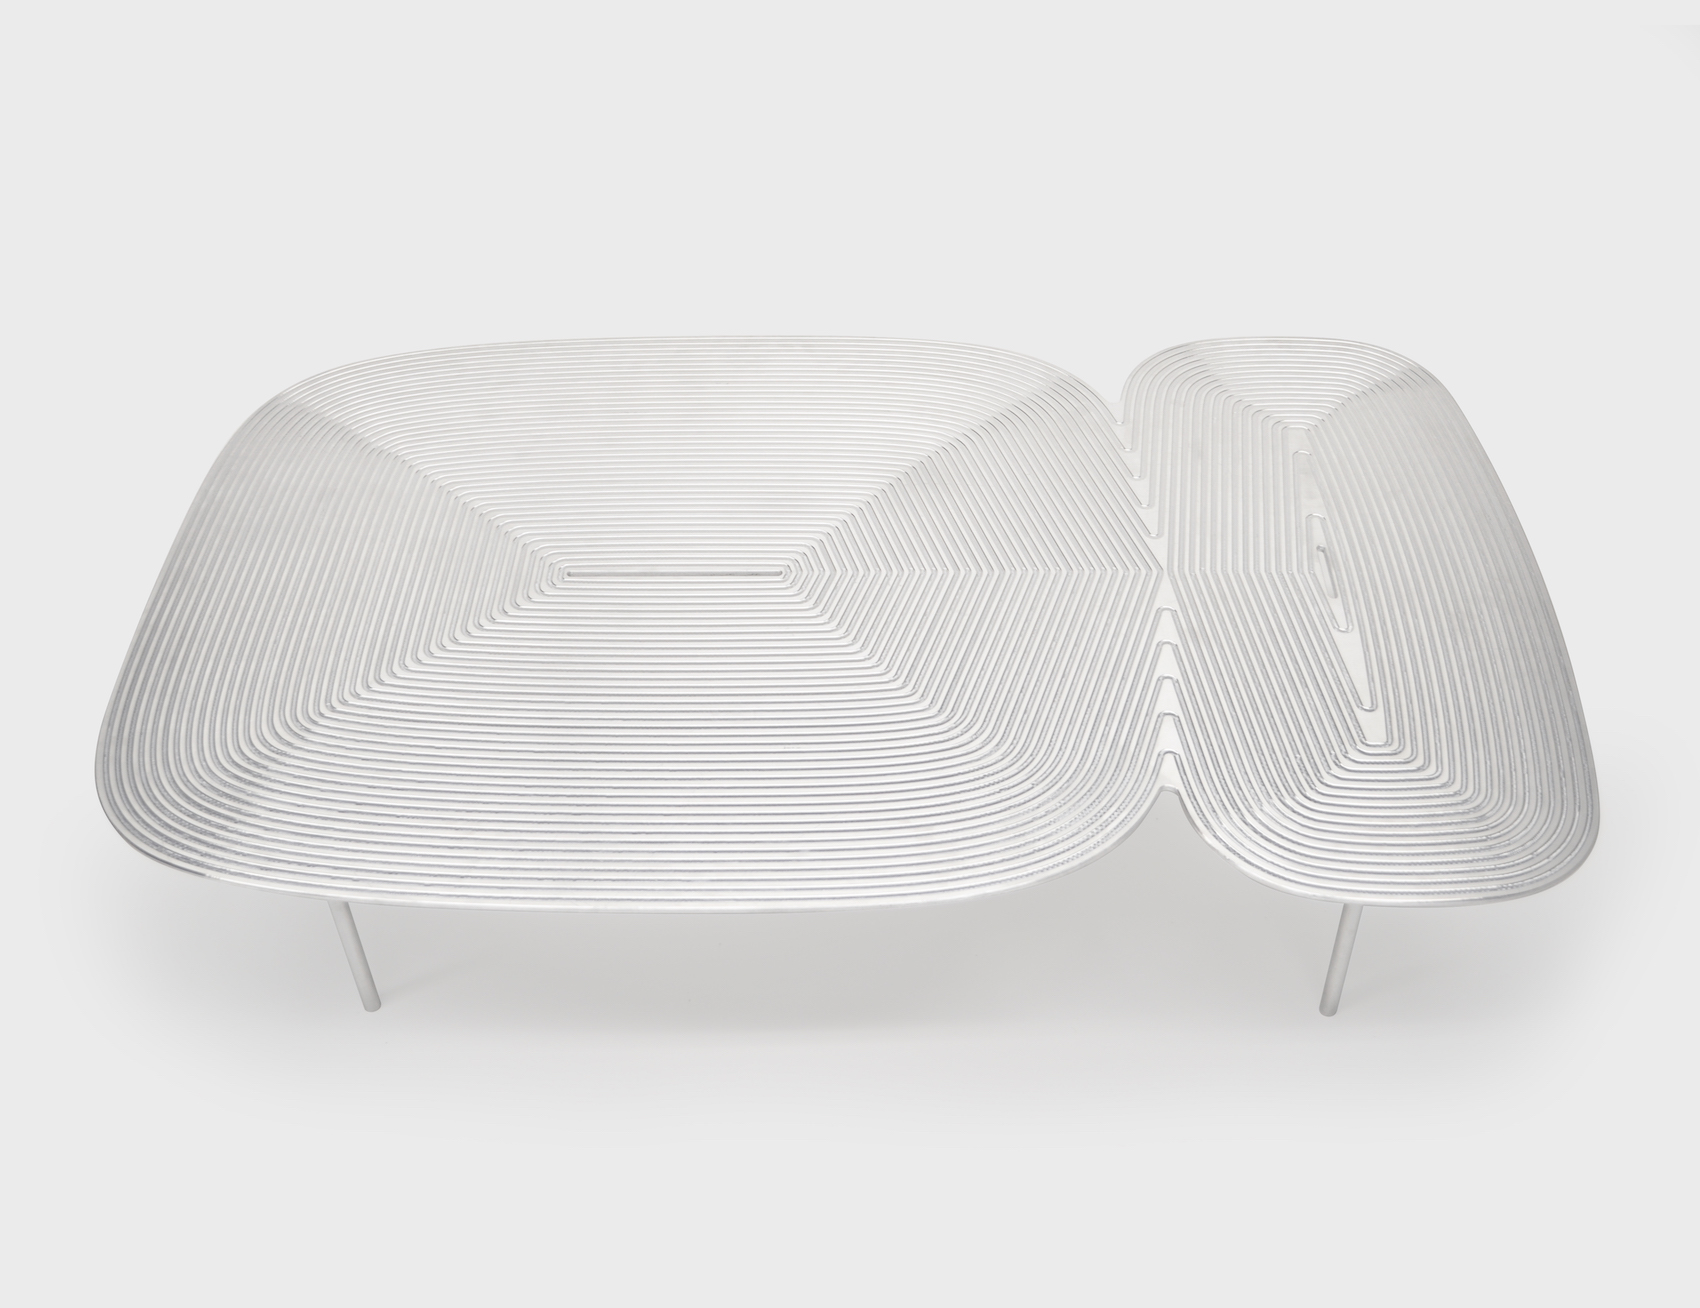 Collate Coffee Table by Alex Brokamp